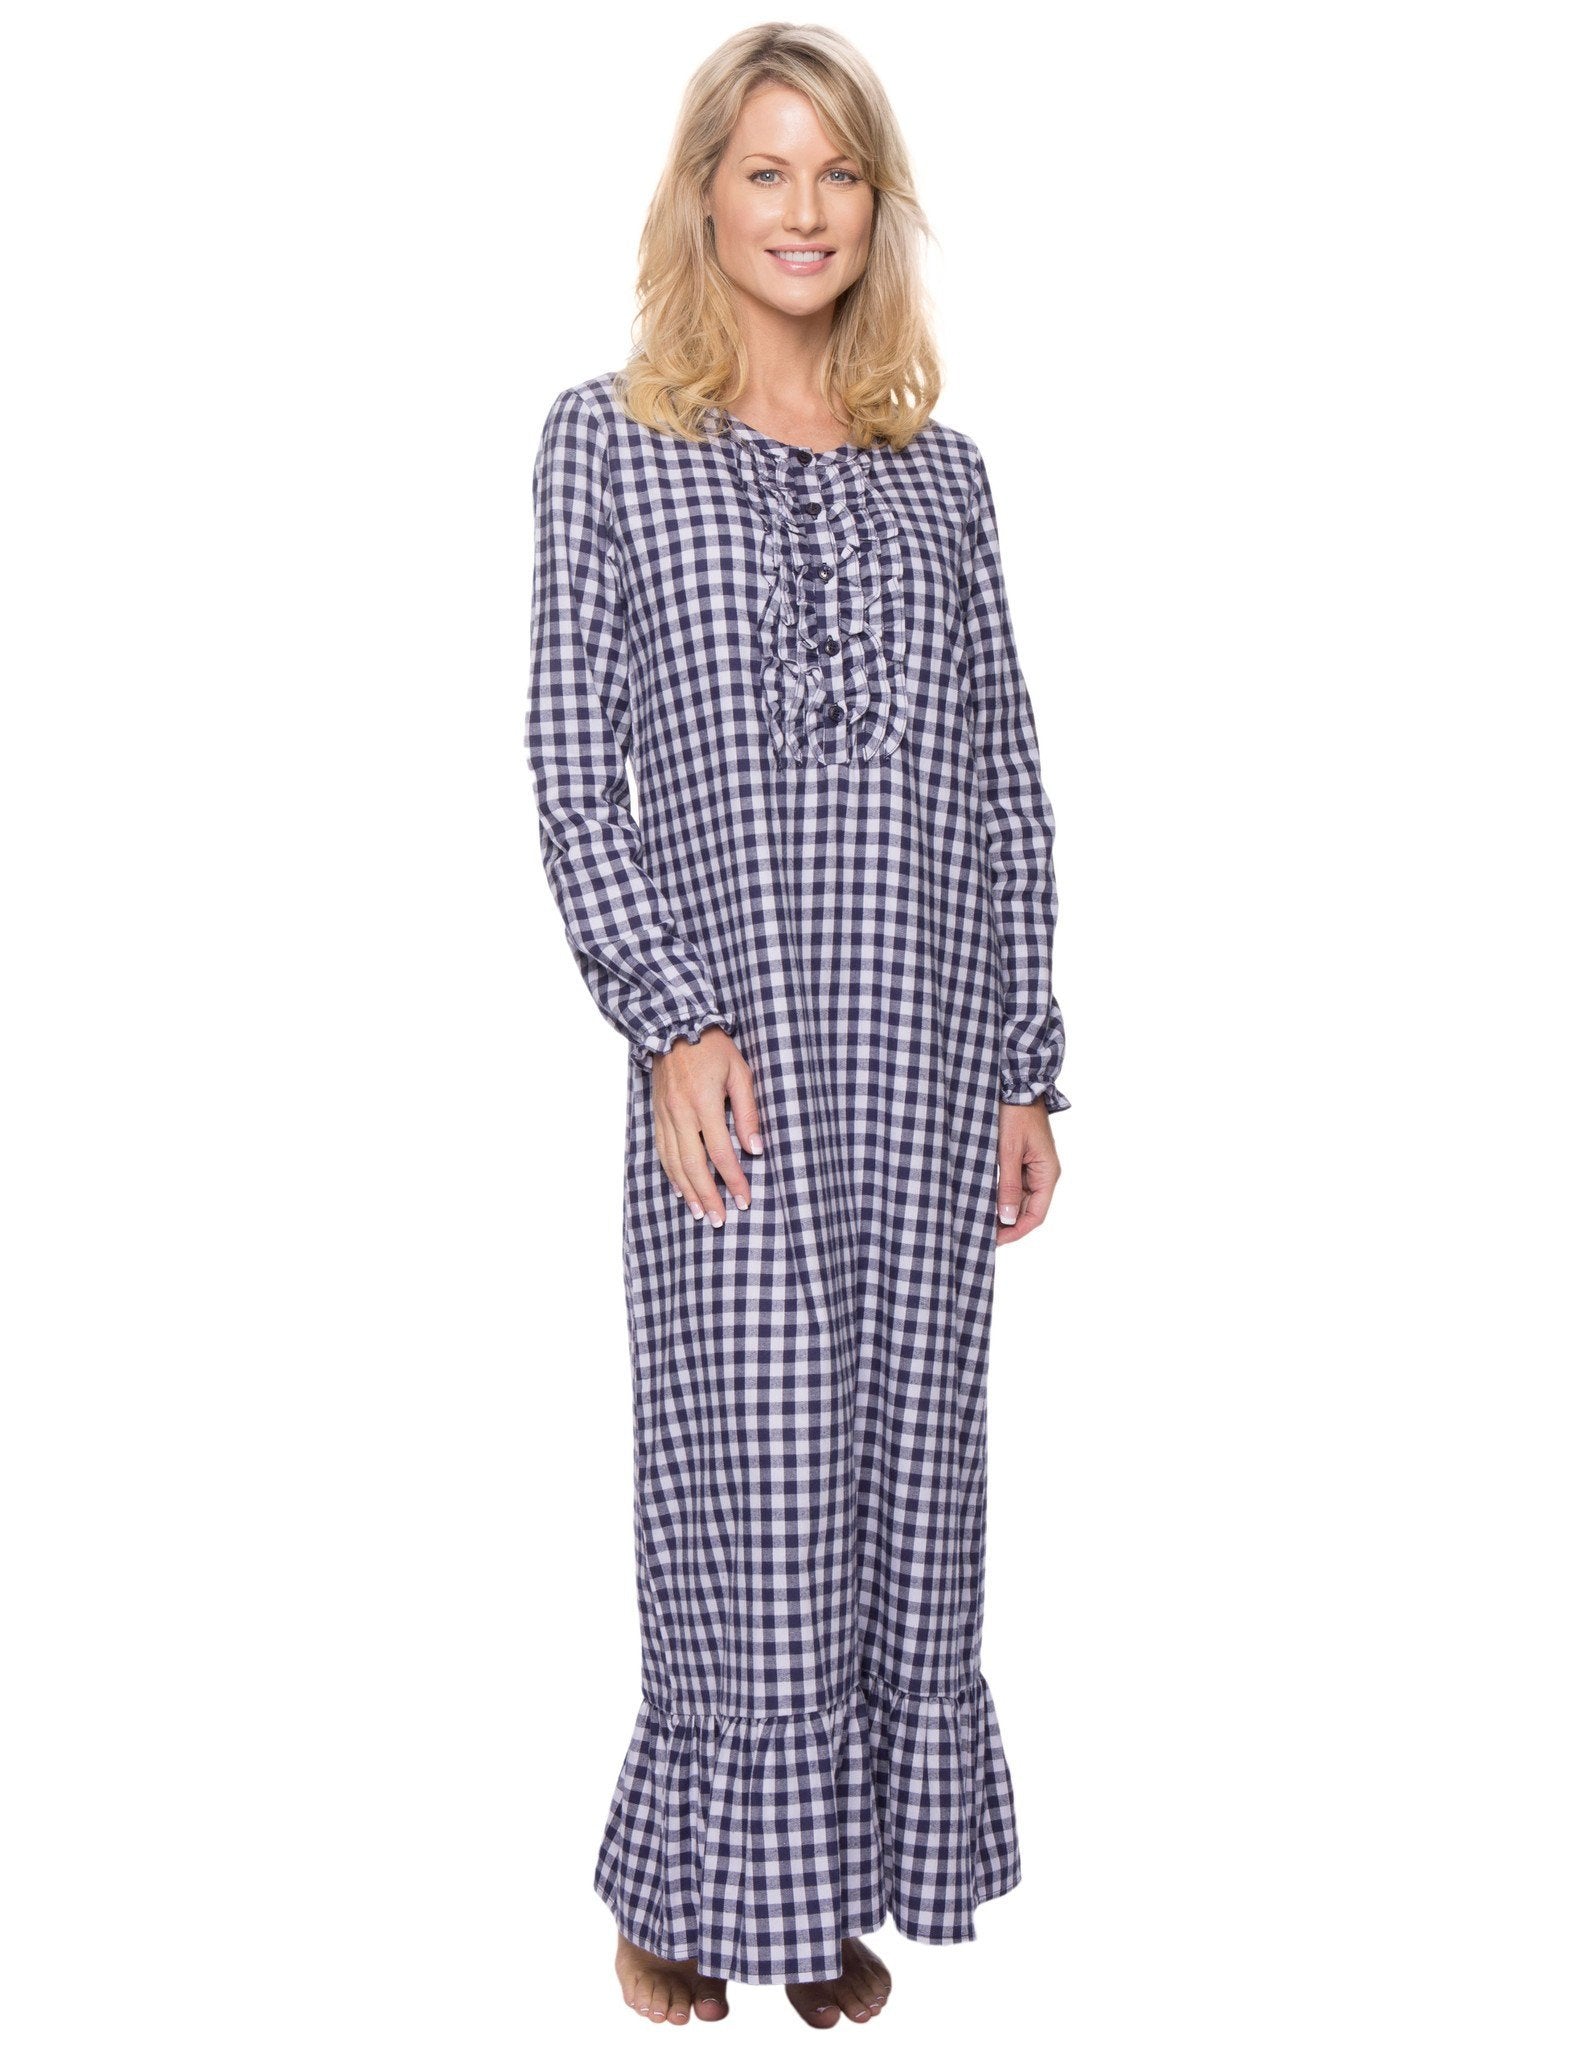 Women's Premium Flannel Long Gown - Gingham Blue/Heather